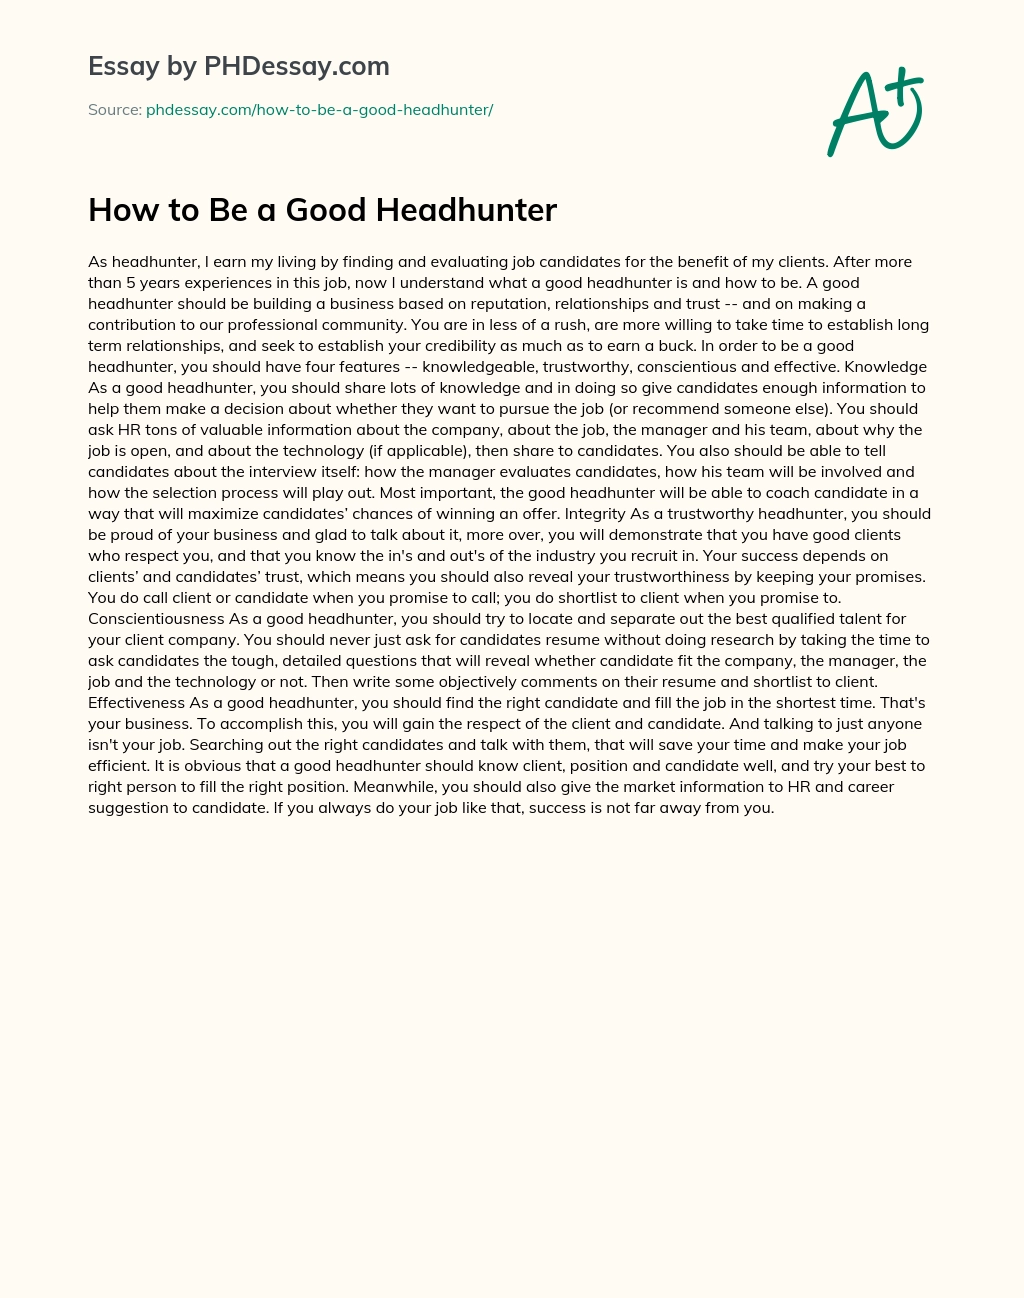 How to Be a Good Headhunter essay